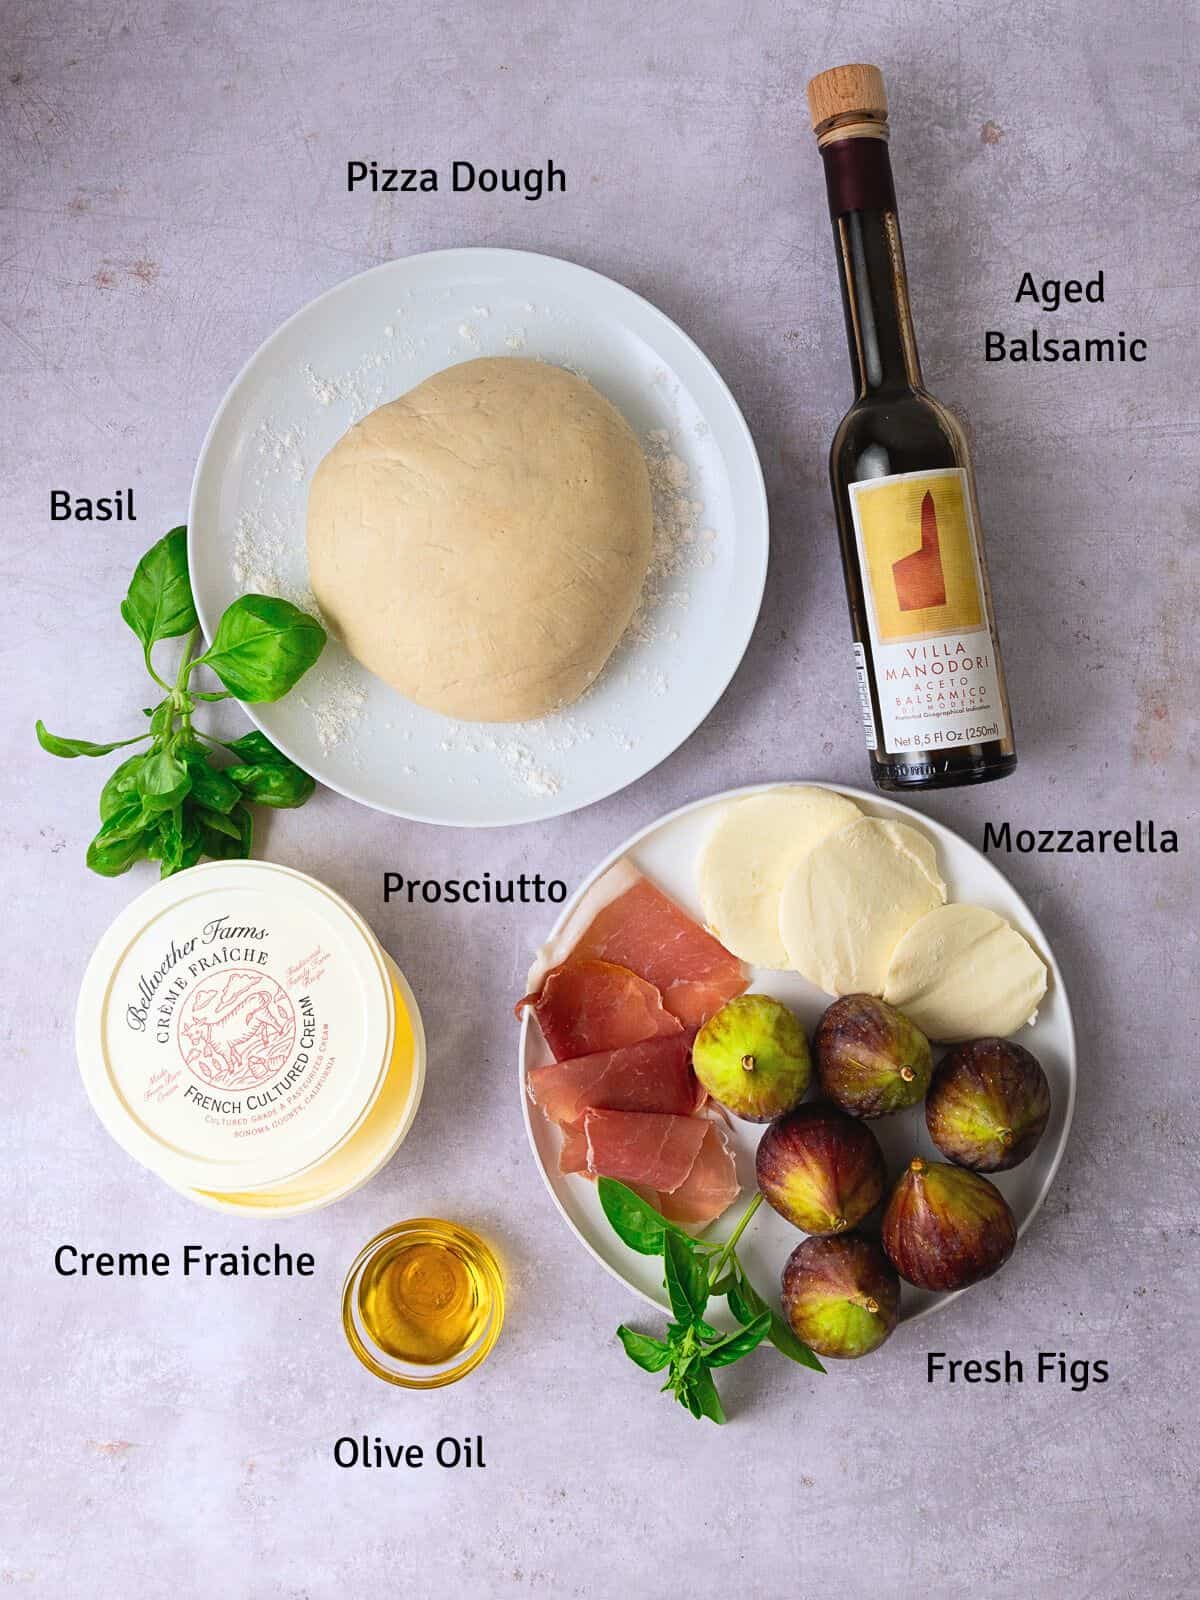 Ingredients for fig and prosciutto pizza, including creme fraiche, mozzarella, basil and aged balsamic,